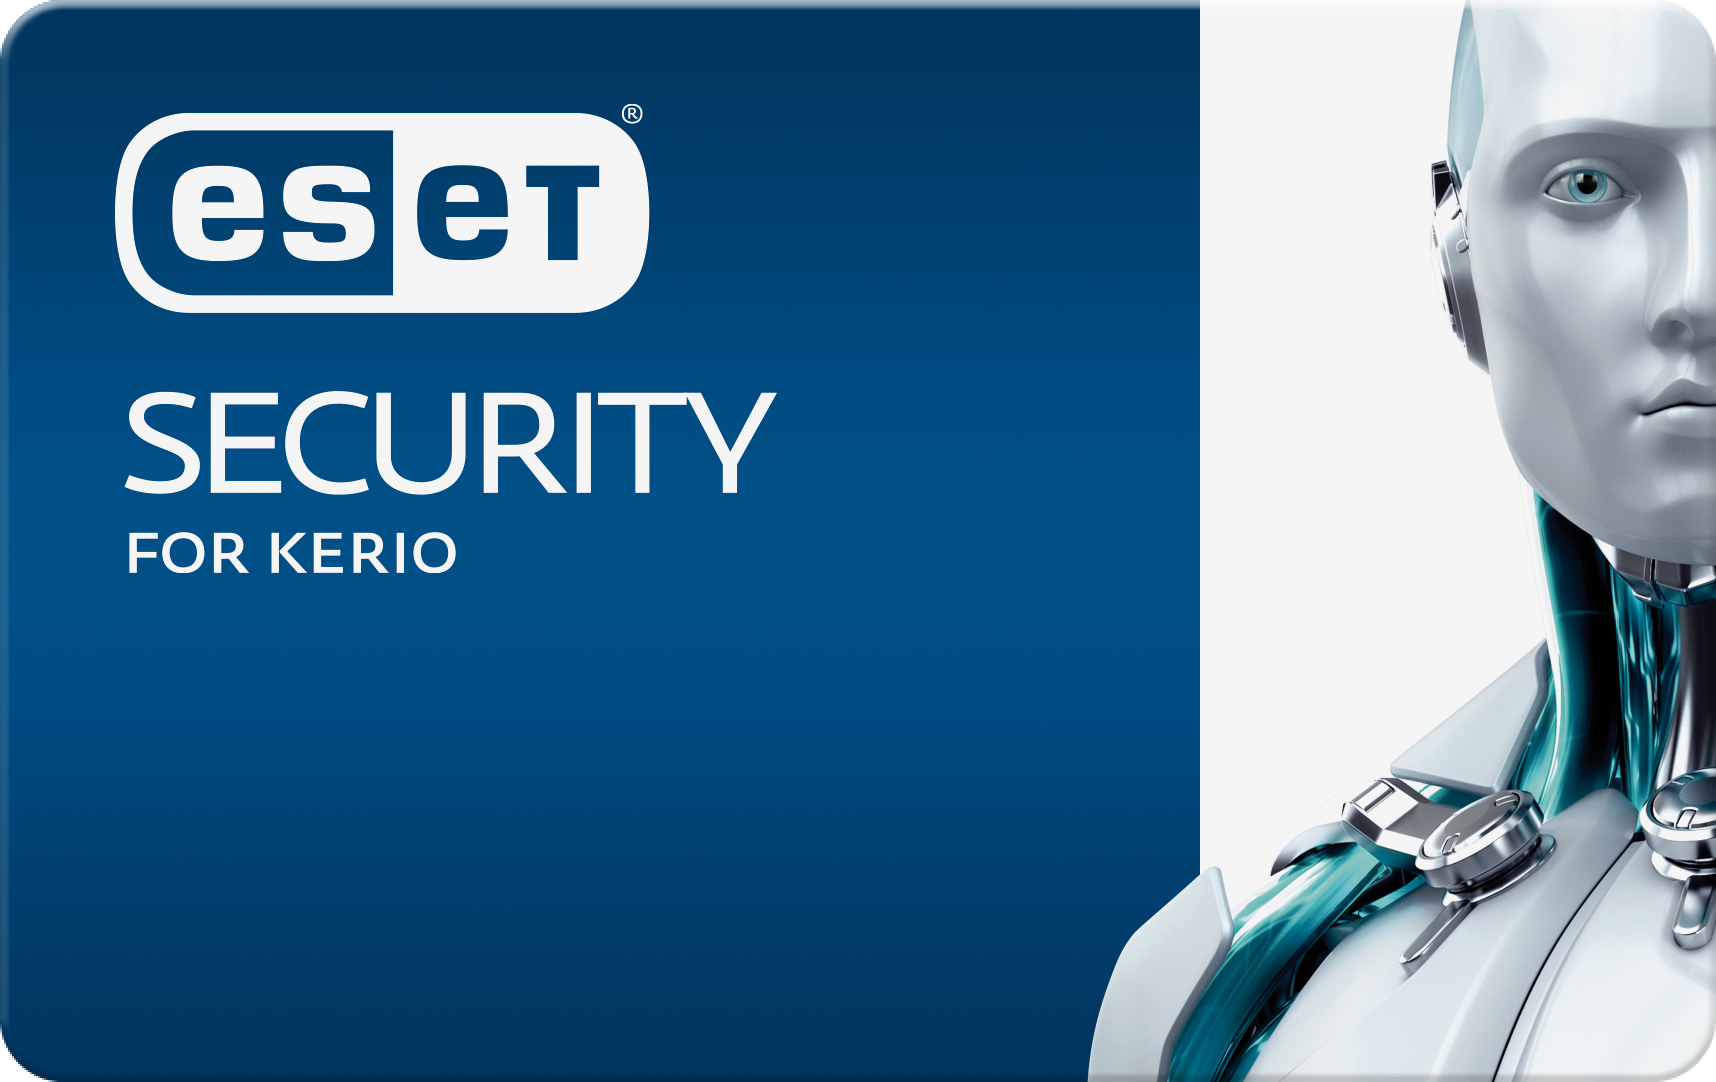 card---eset-security-for-kerio.png